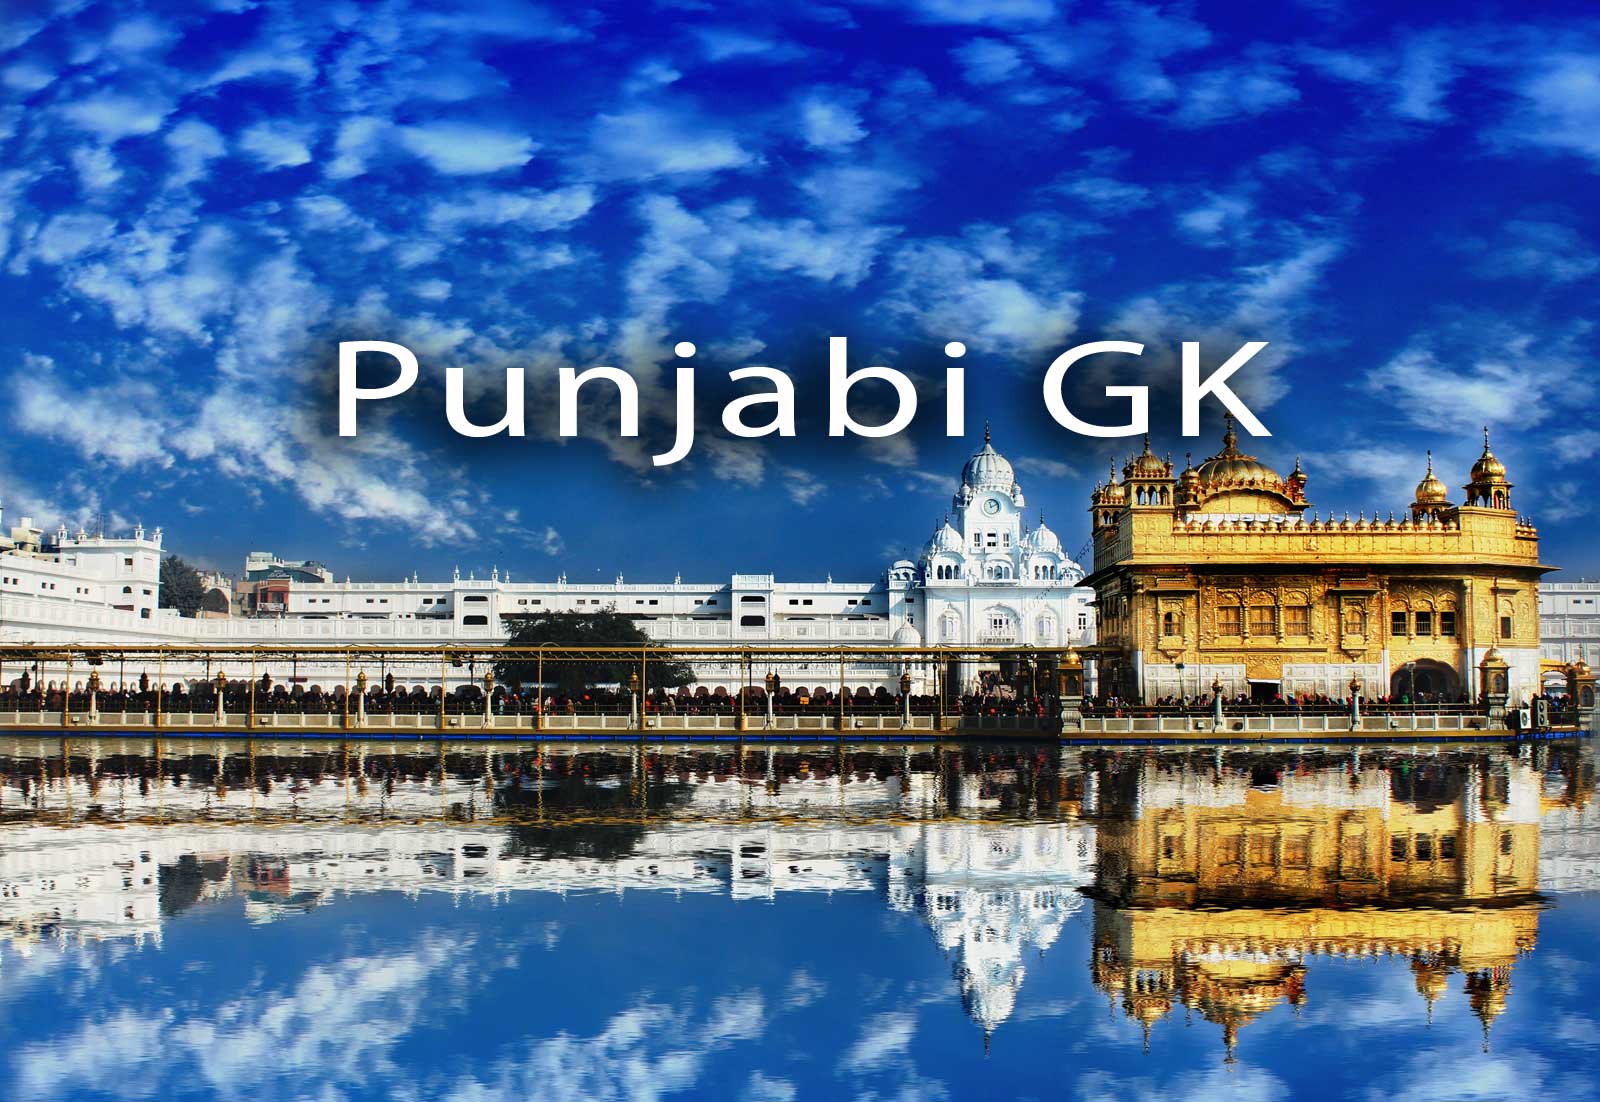 Punjabi GK Practice Questions and Answers